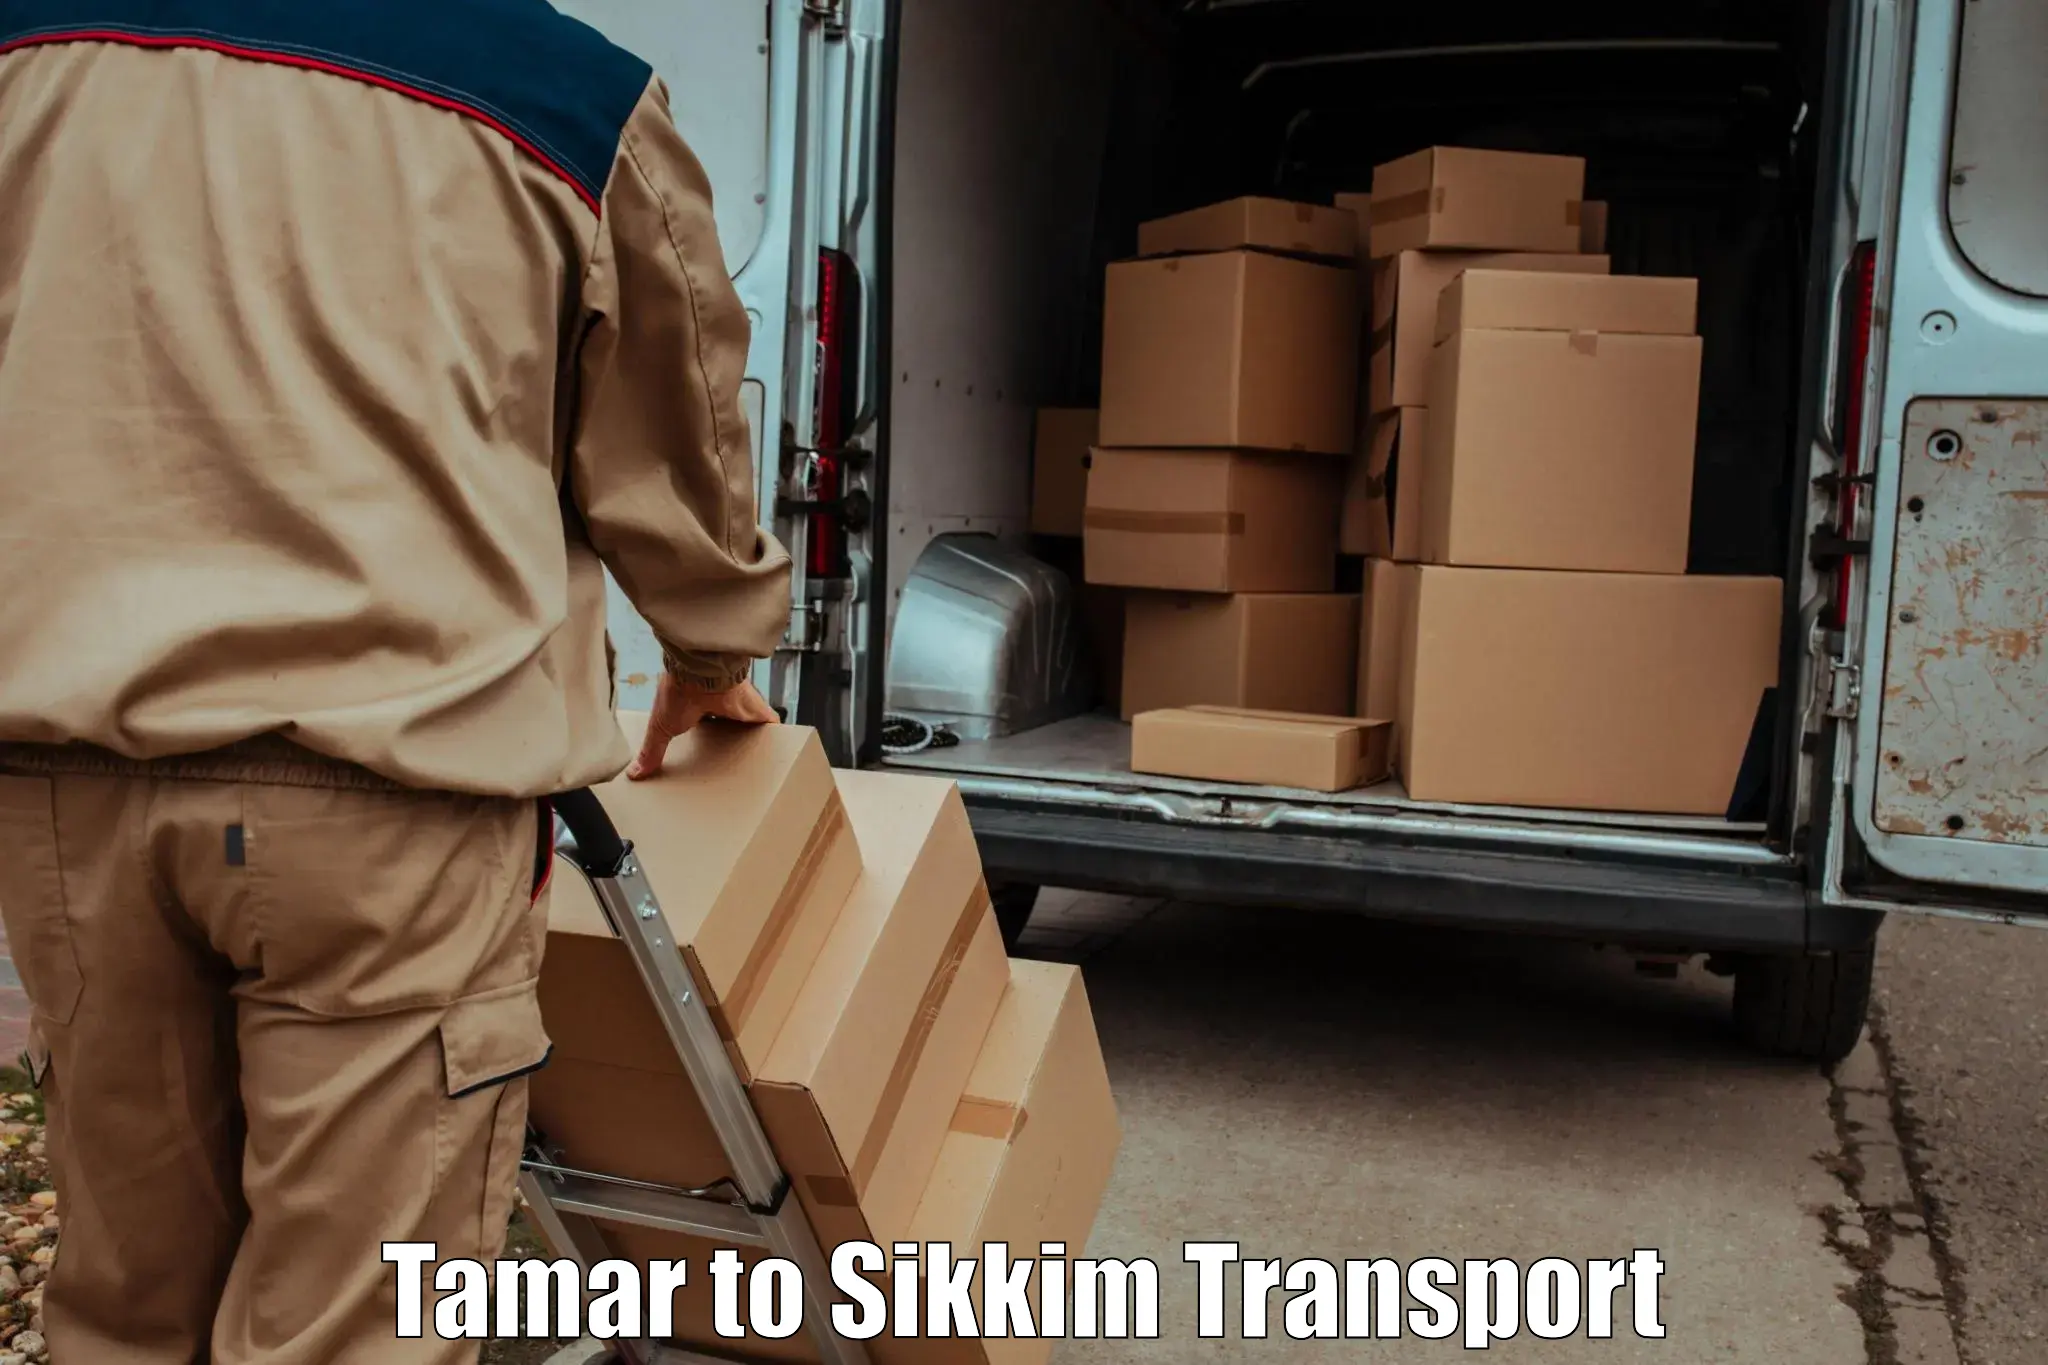 Pick up transport service in Tamar to Pelling